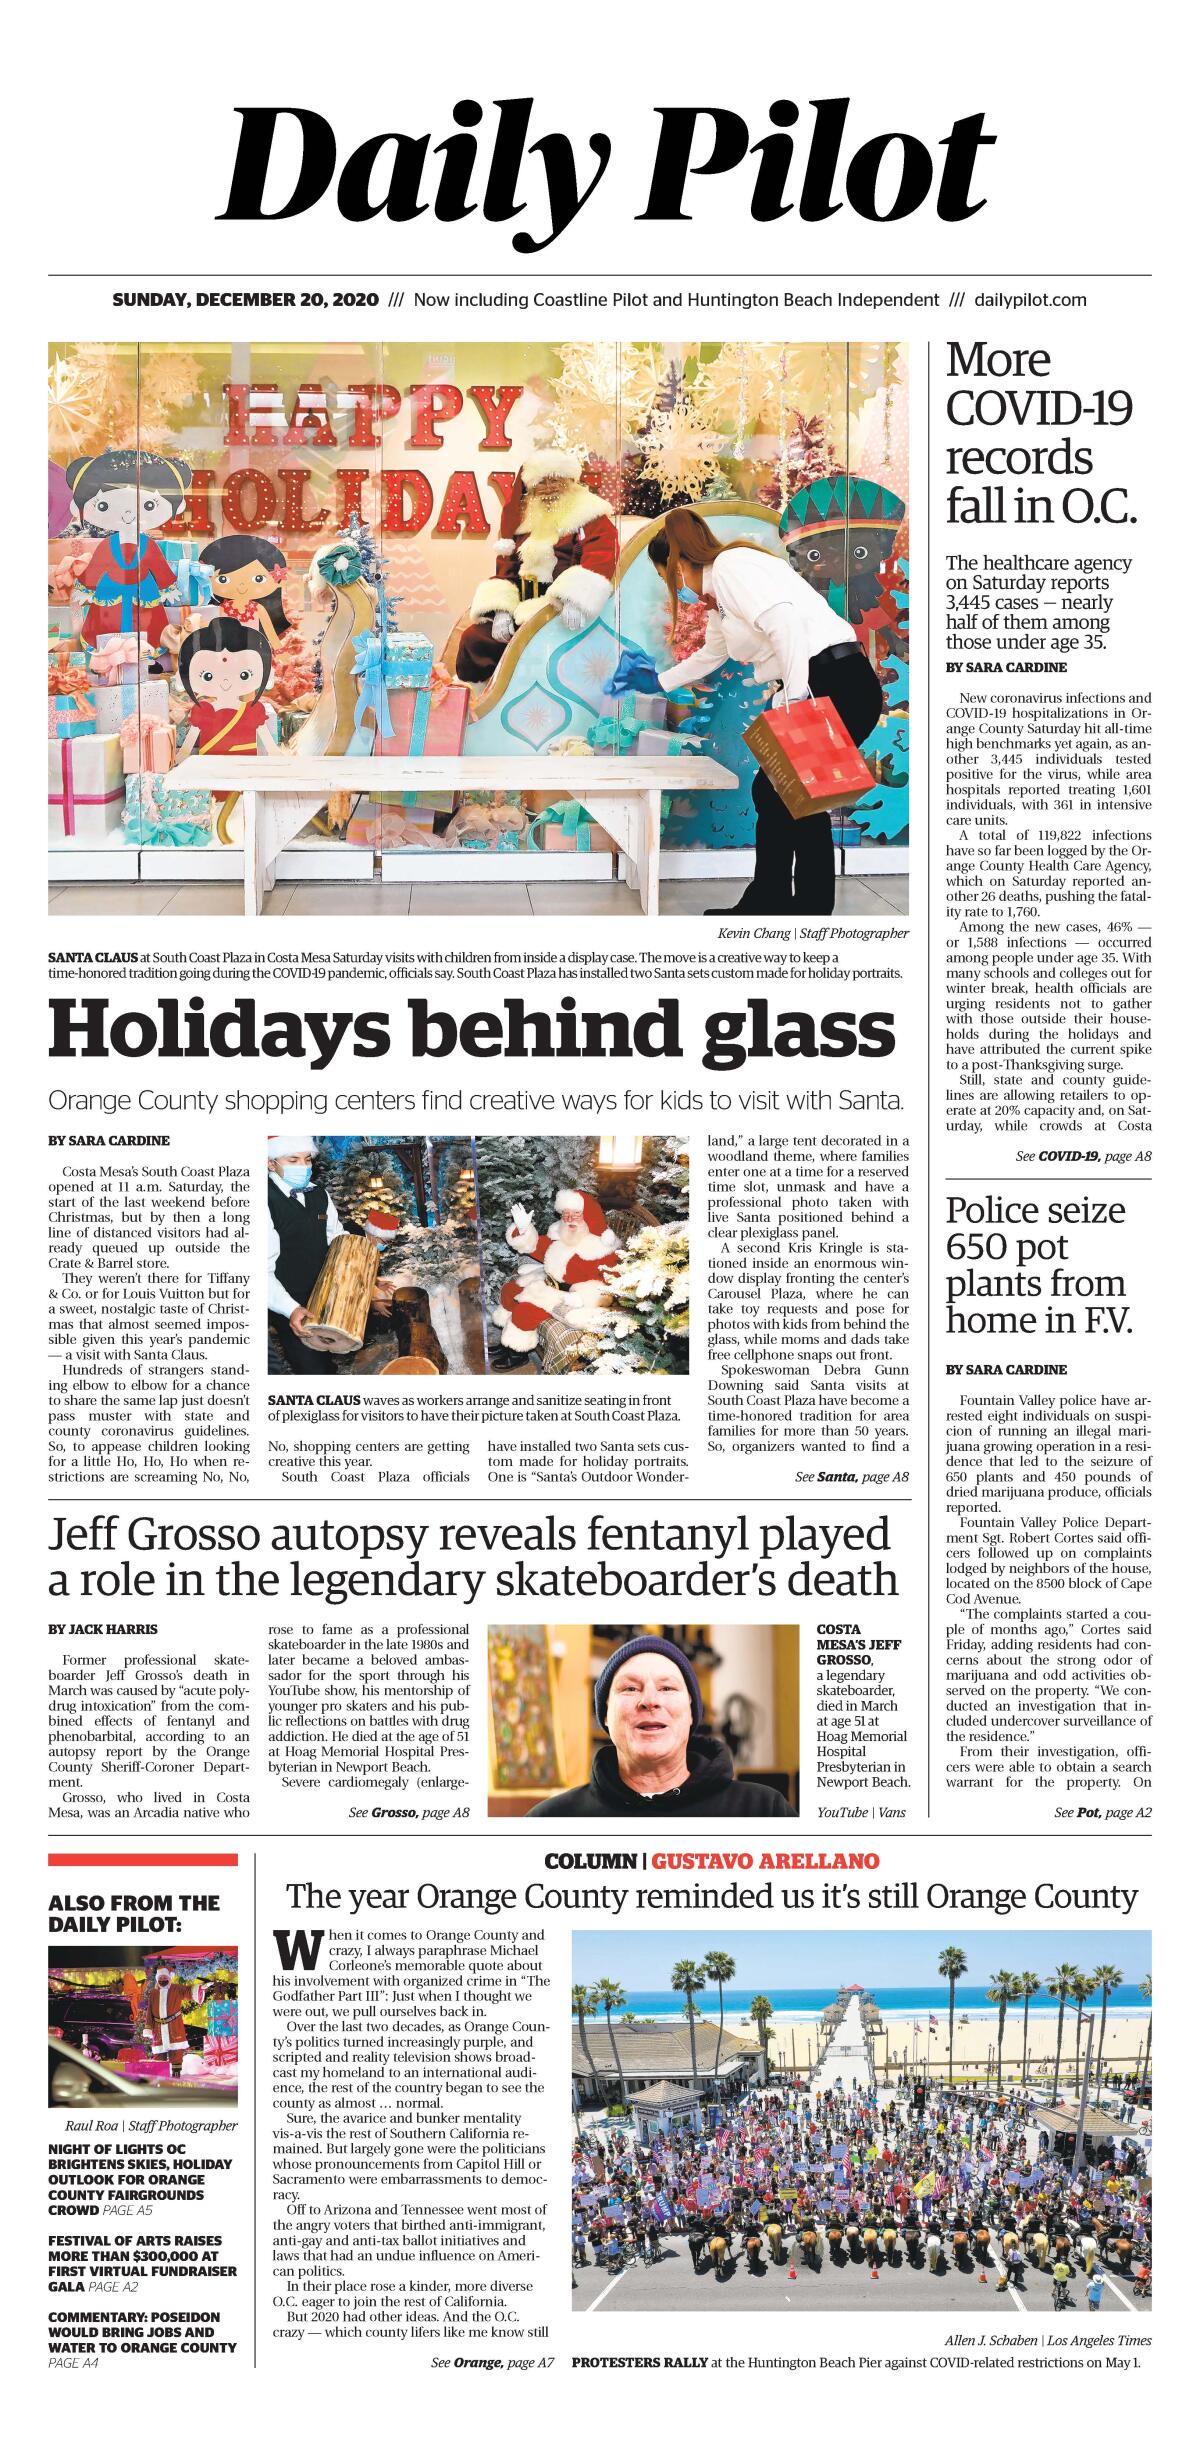 Front page of Daily Pilot e-newspaper for Sunday, Dec. 20, 2020.